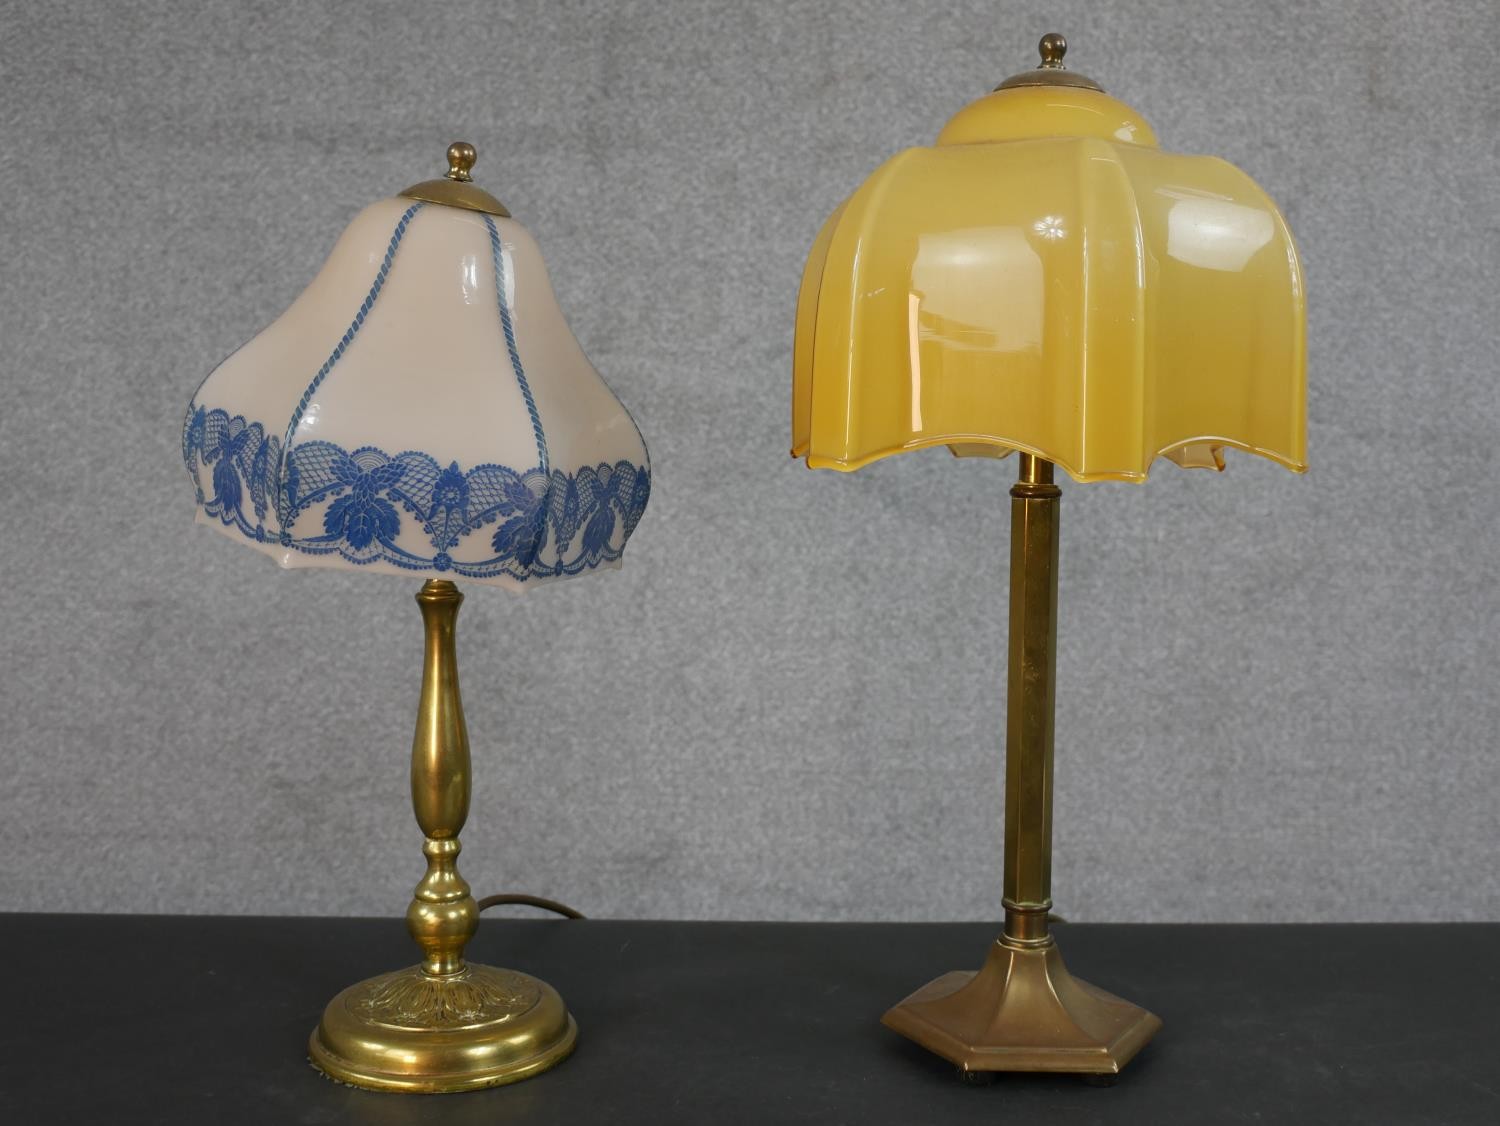 Two mid 20th century brass table lamps, one with a yellow glass shade, the other with a blue and